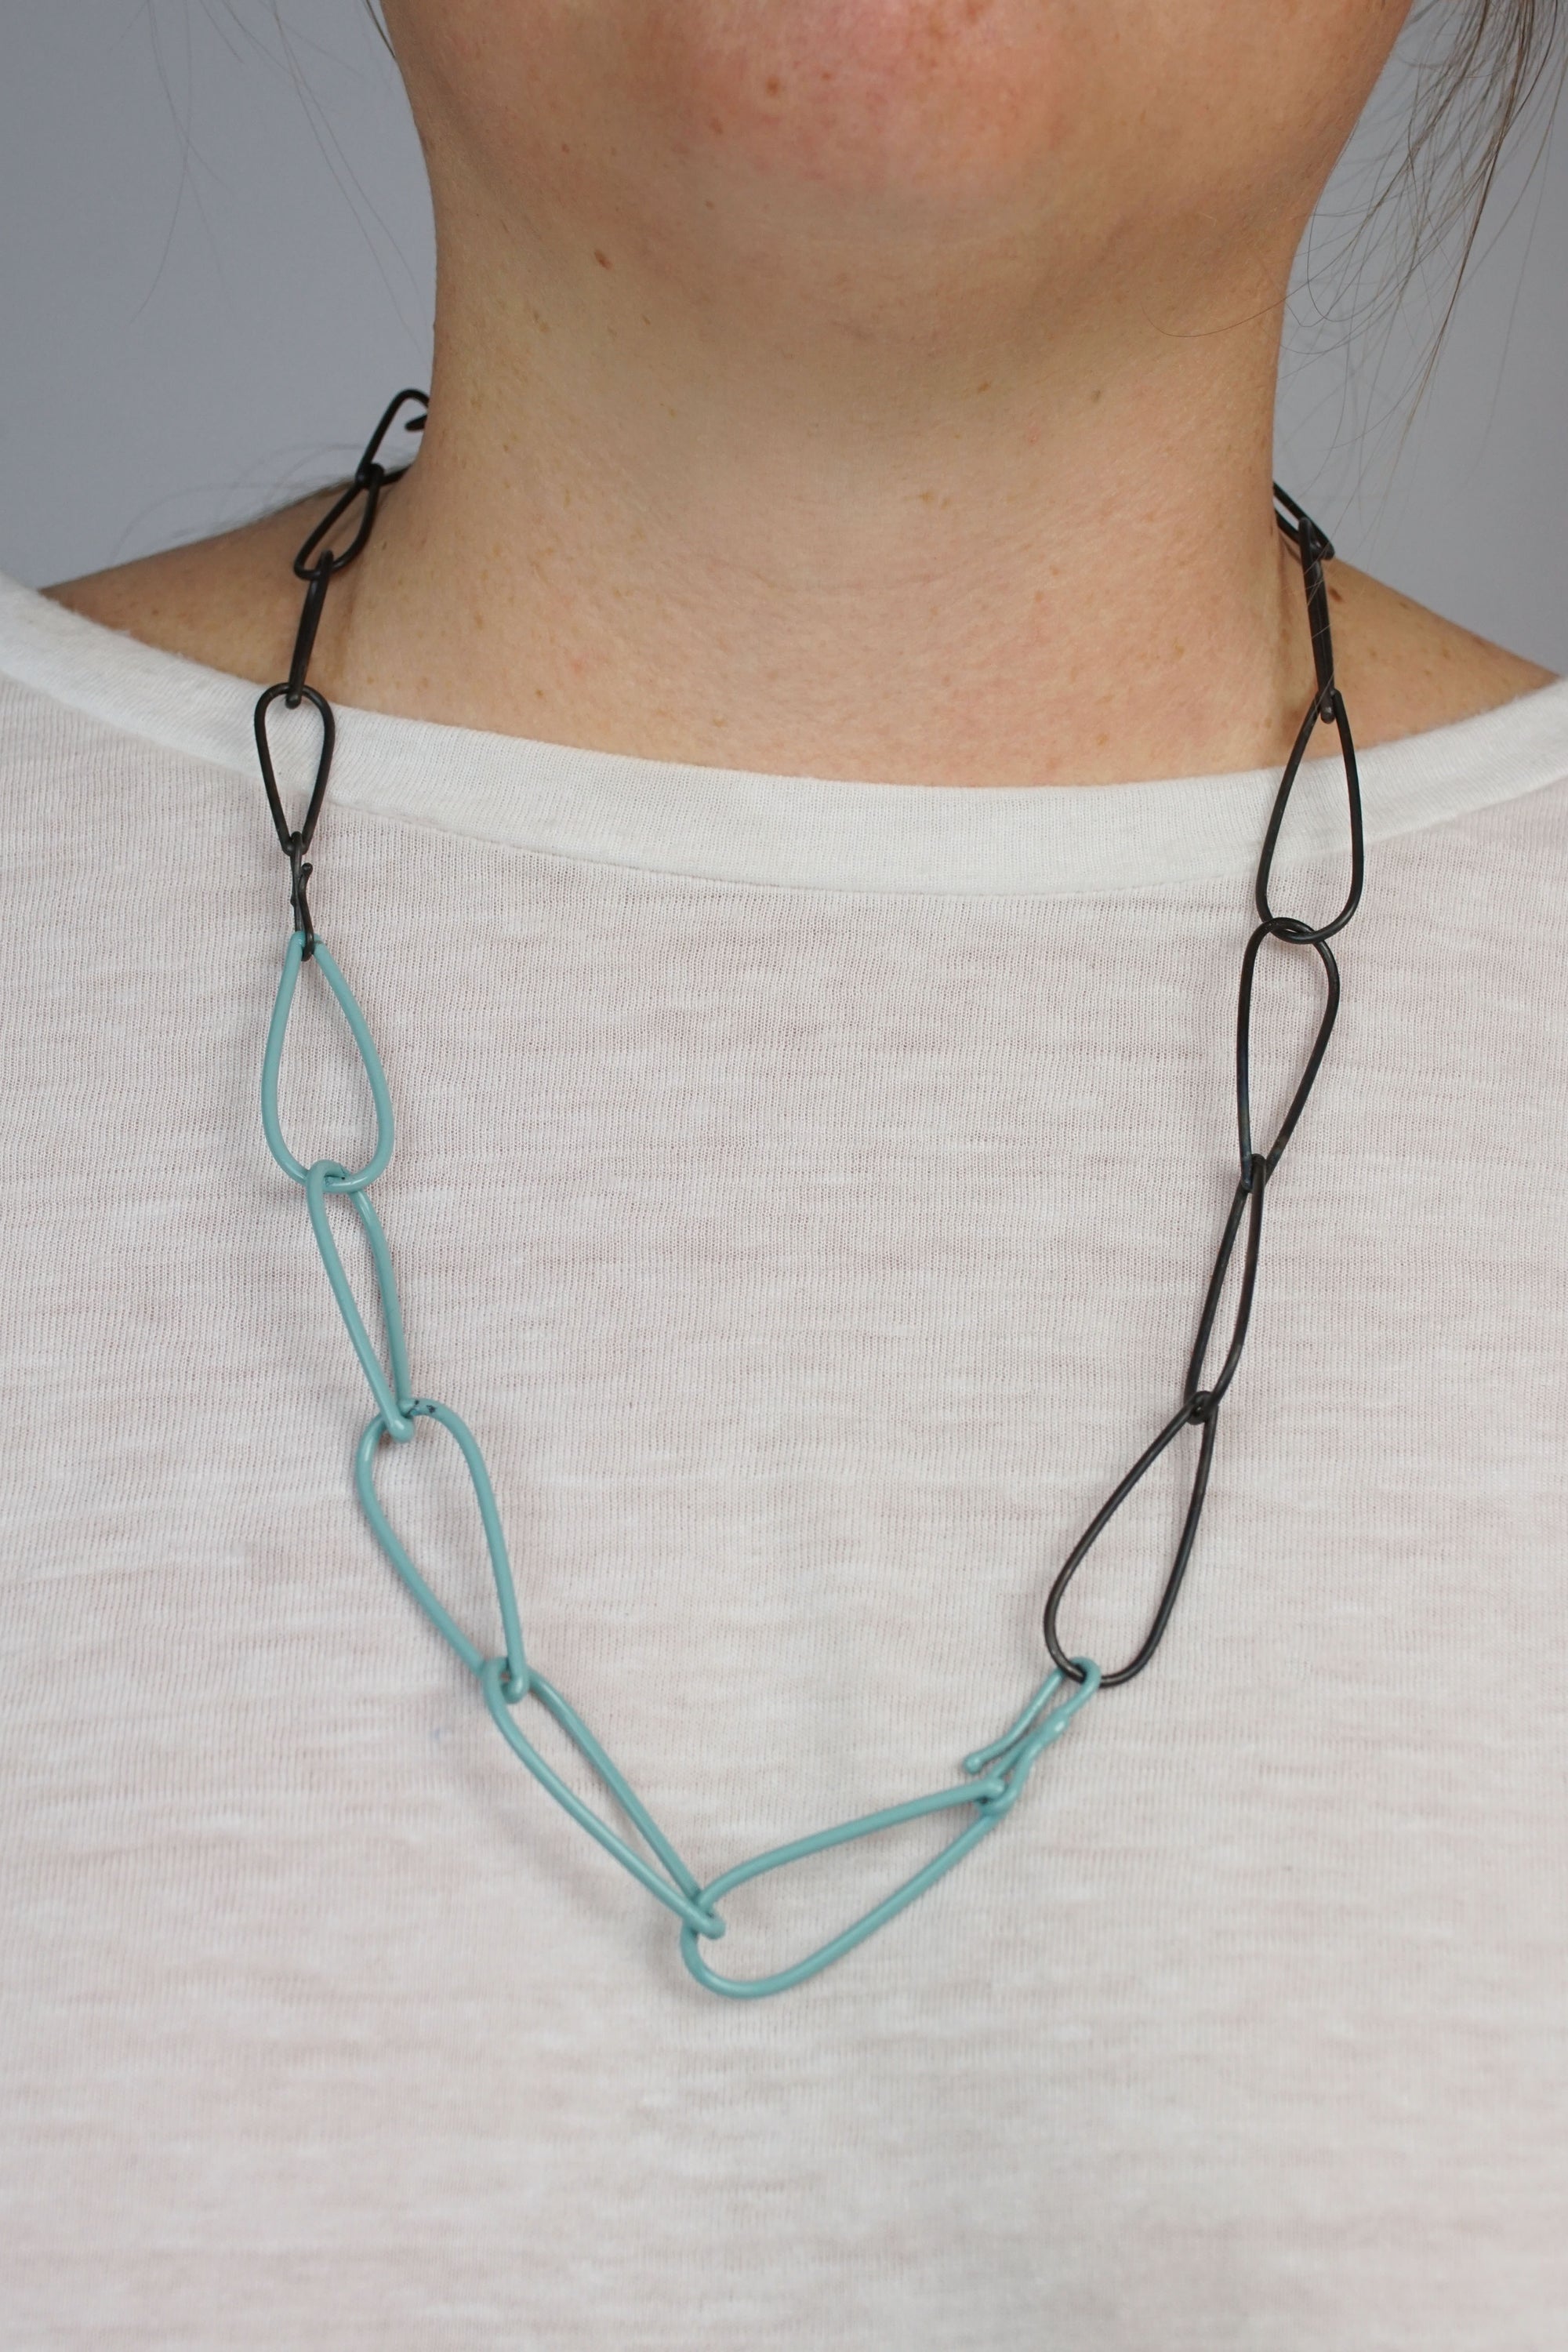 Modular Necklace in Steel and Faded Teal